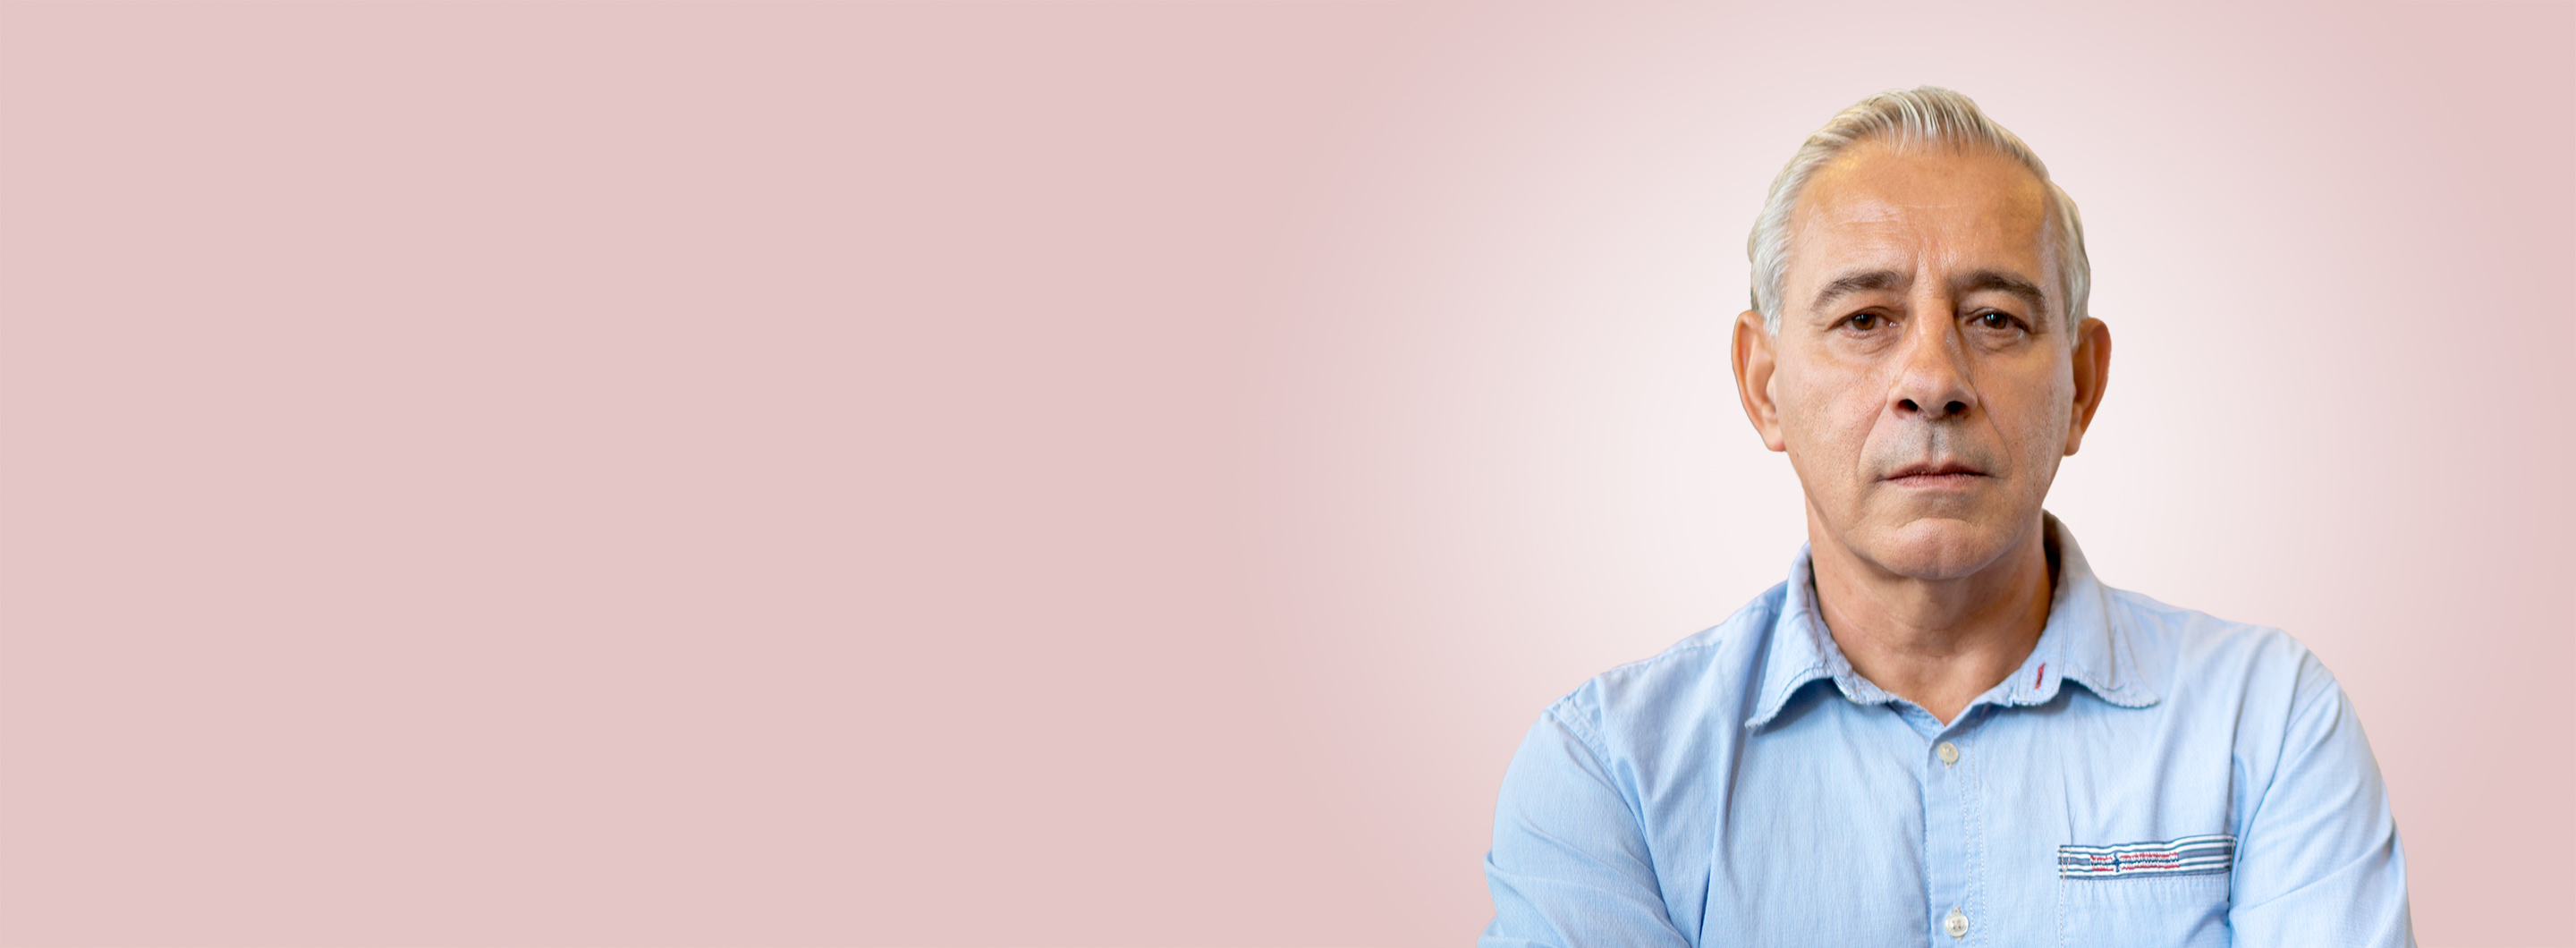 Banner image of a man with gray hair